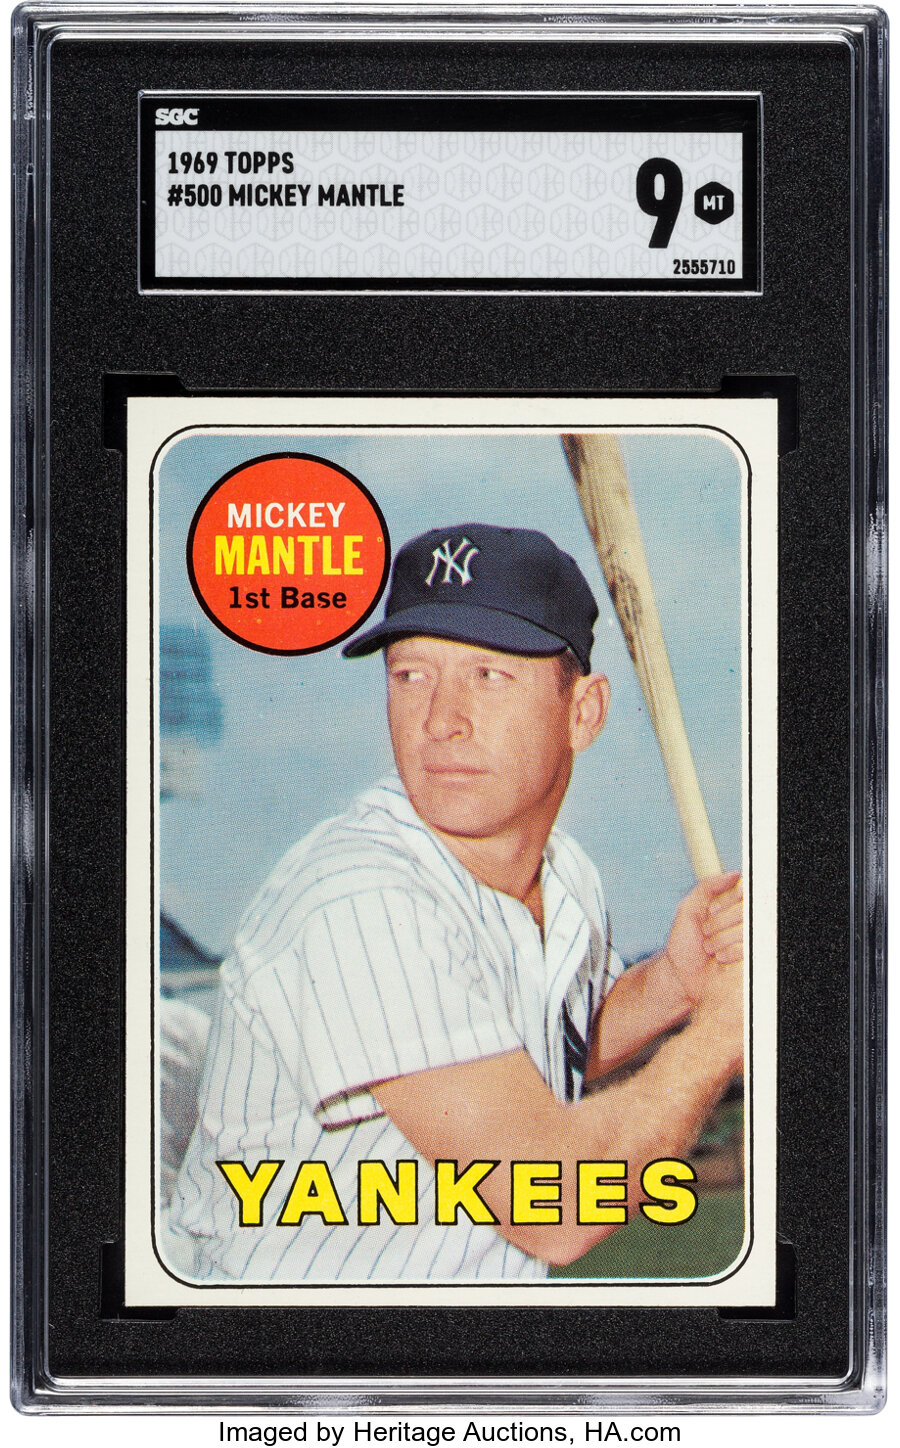 1969 Topps Mickey Mantle (Yellow Letters) #500 SGC Mint 9 - Pop Nine, One Higher